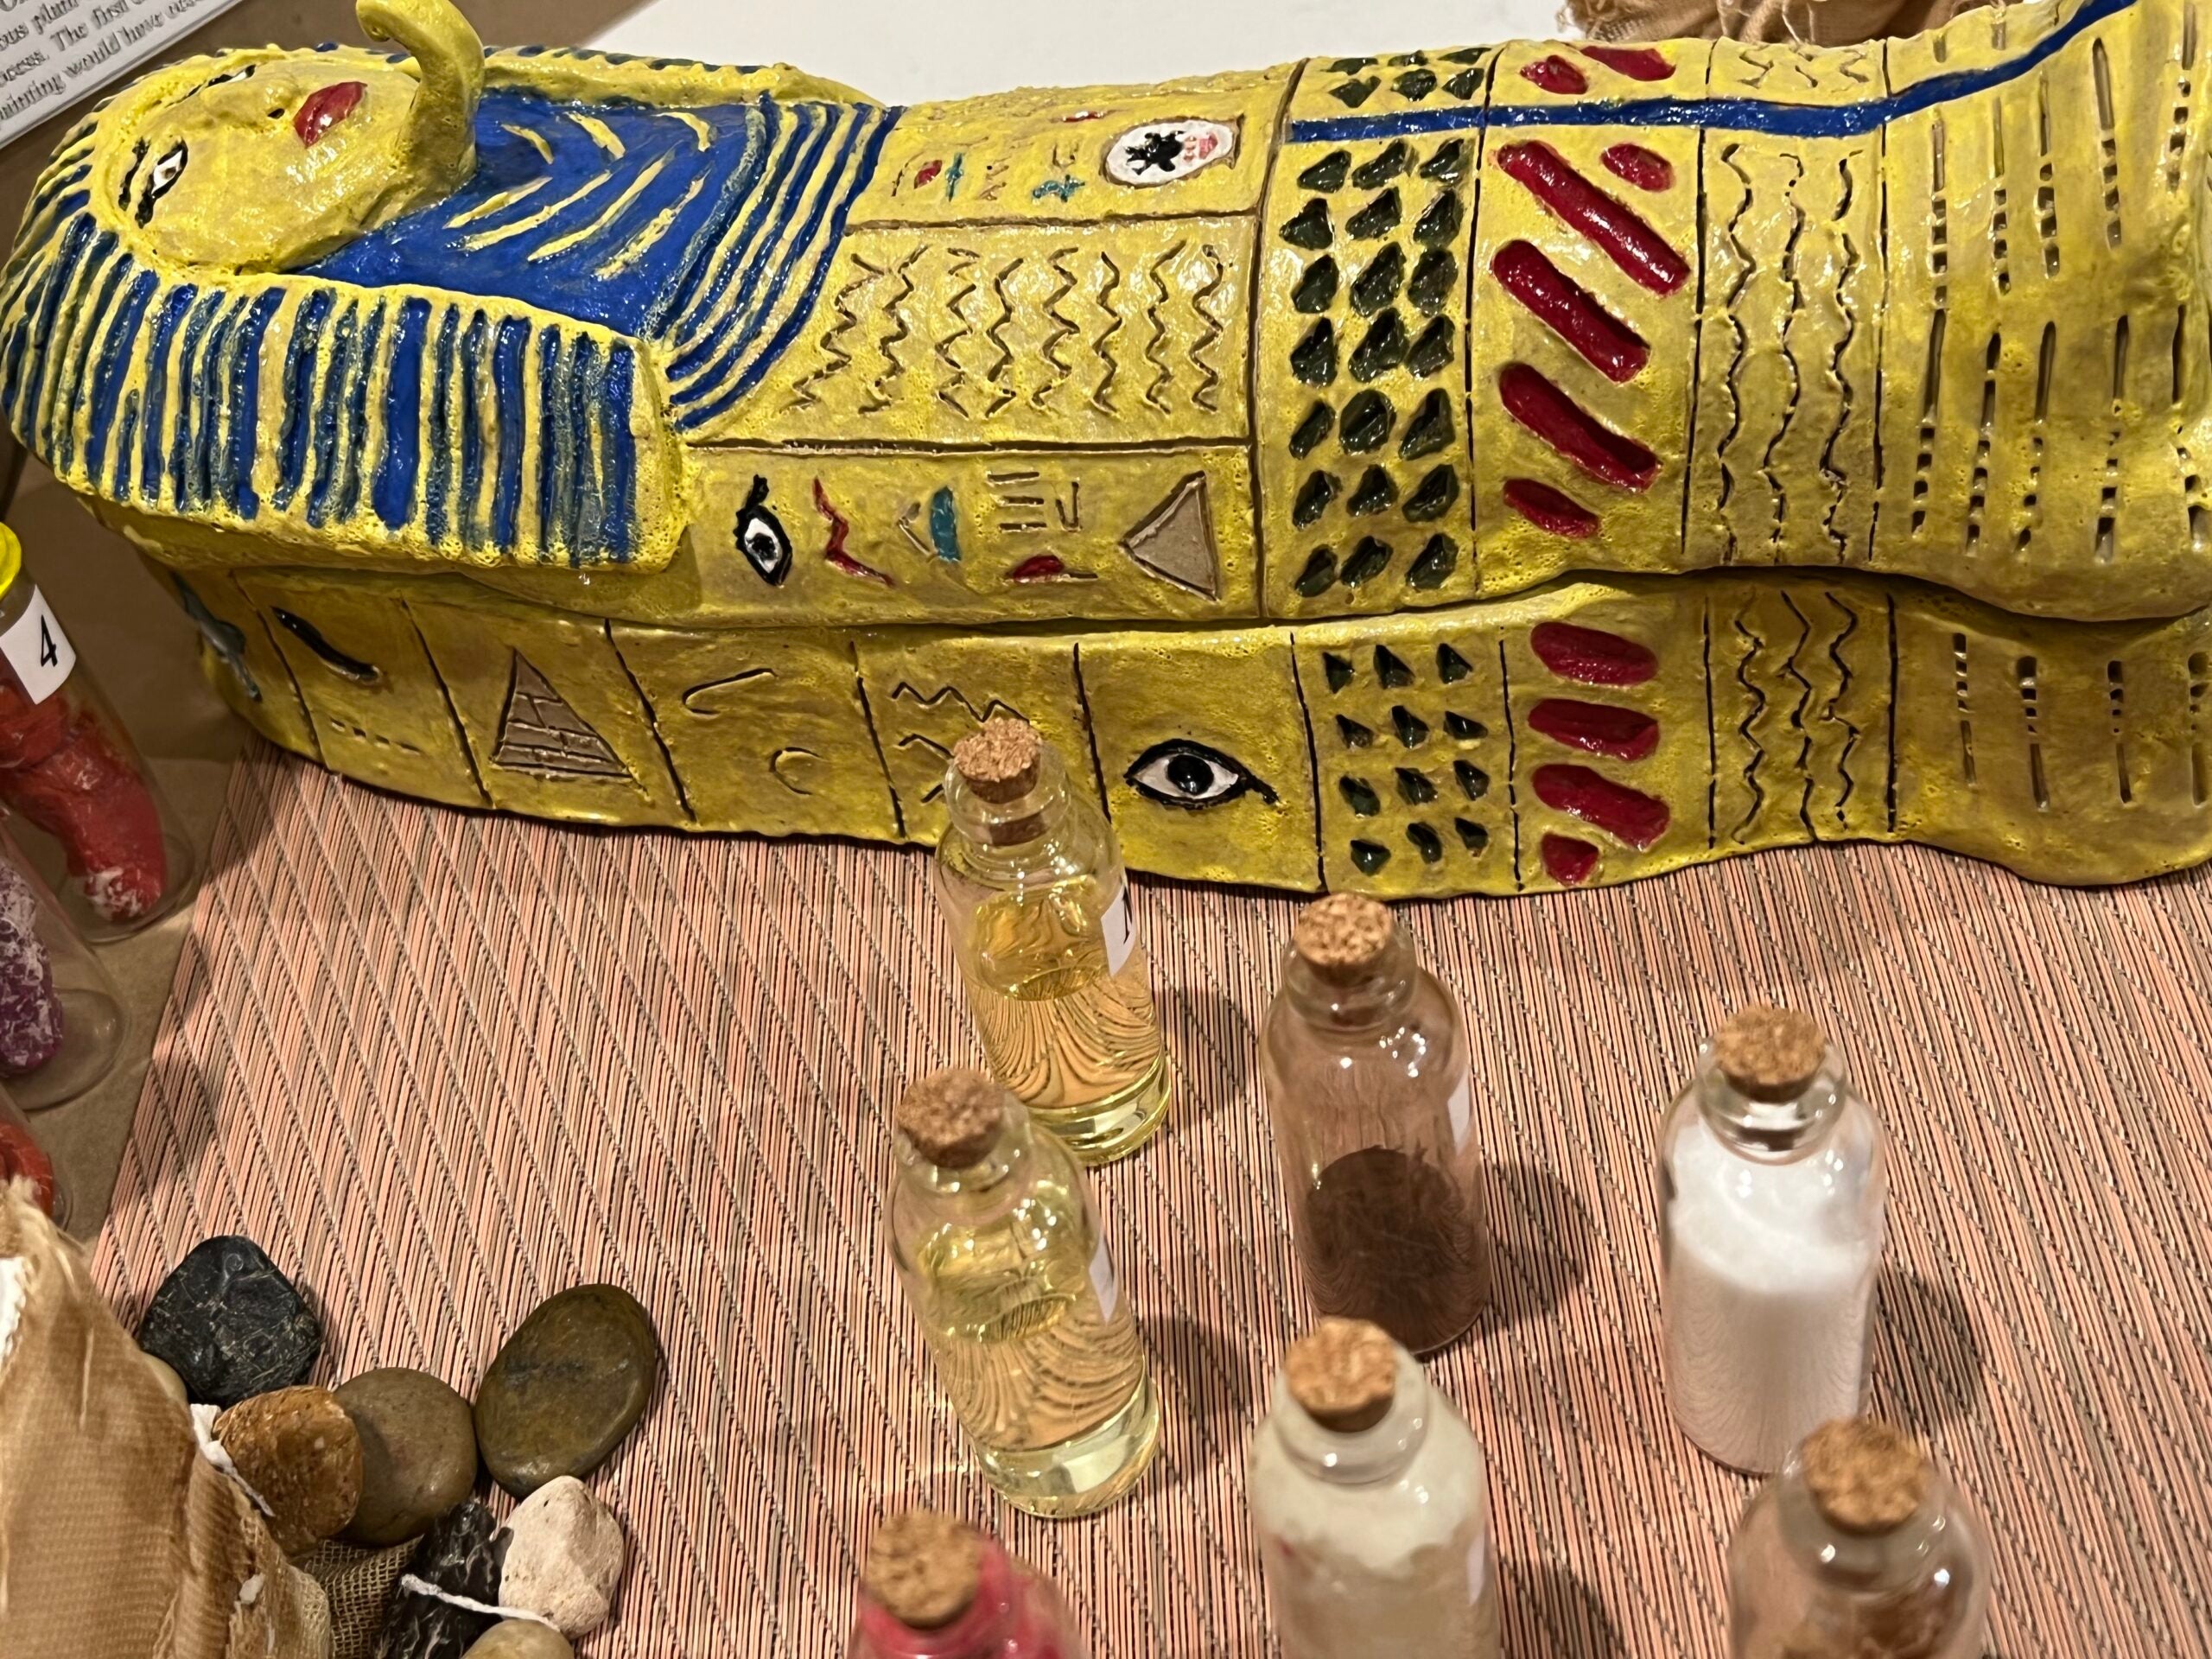 Hand-made clay sarcophagus displaying the final wrapped version of the mummy (the lid is closed). Next, there are bottles representing the plant-based materials used in the mummification process